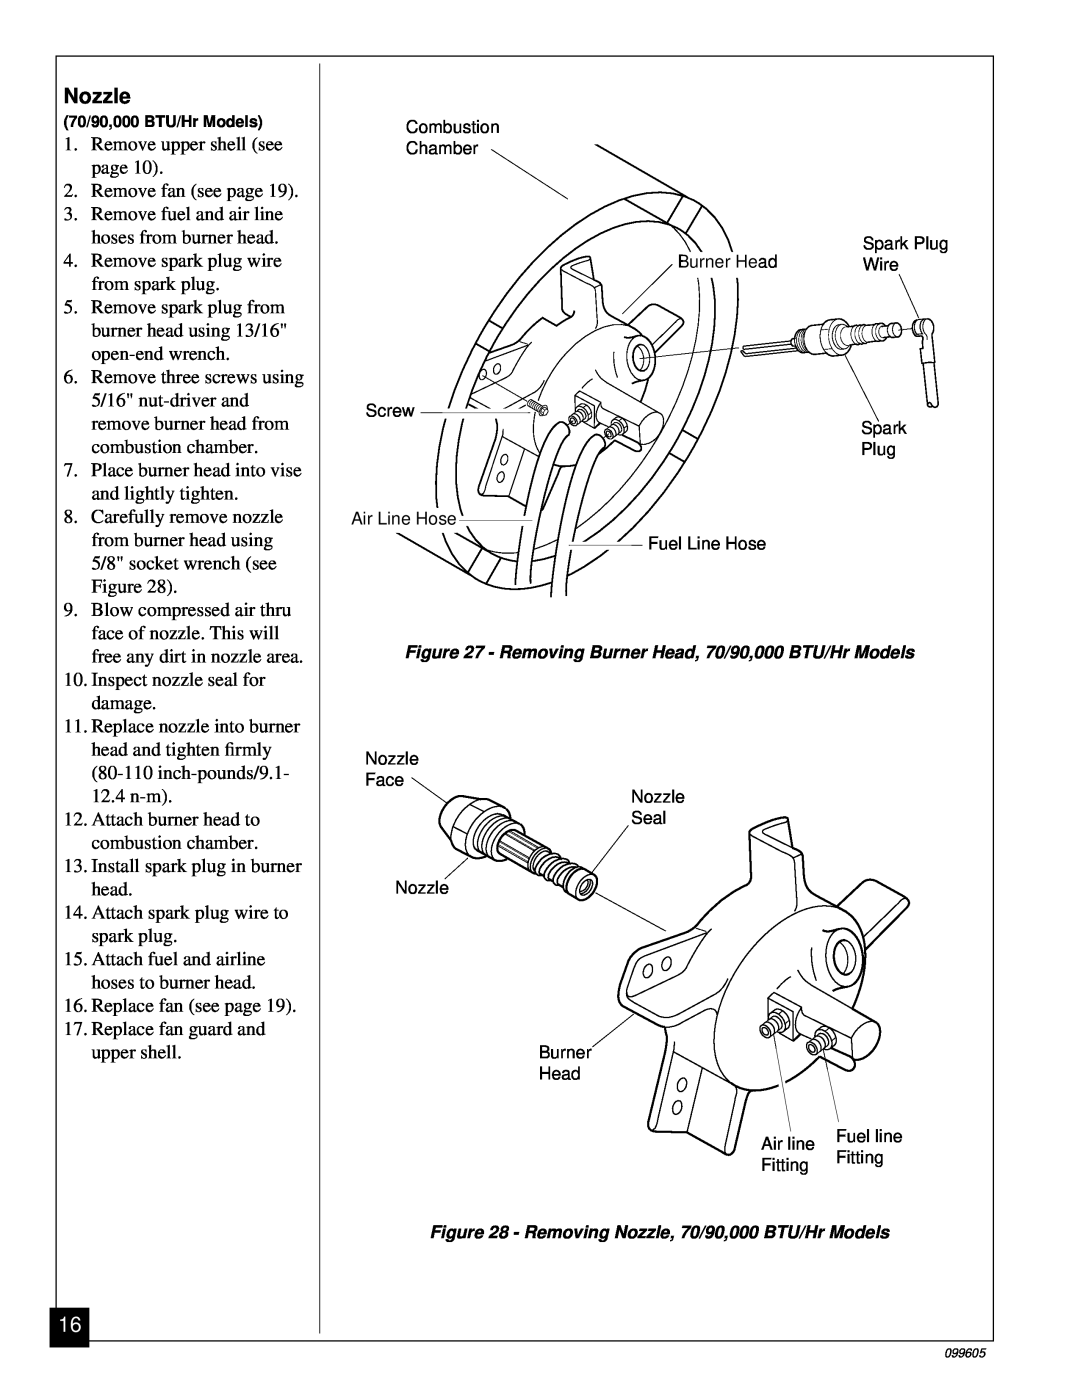 Desa H.S.I. Series owner manual Nozzle, Remove upper shell see page 